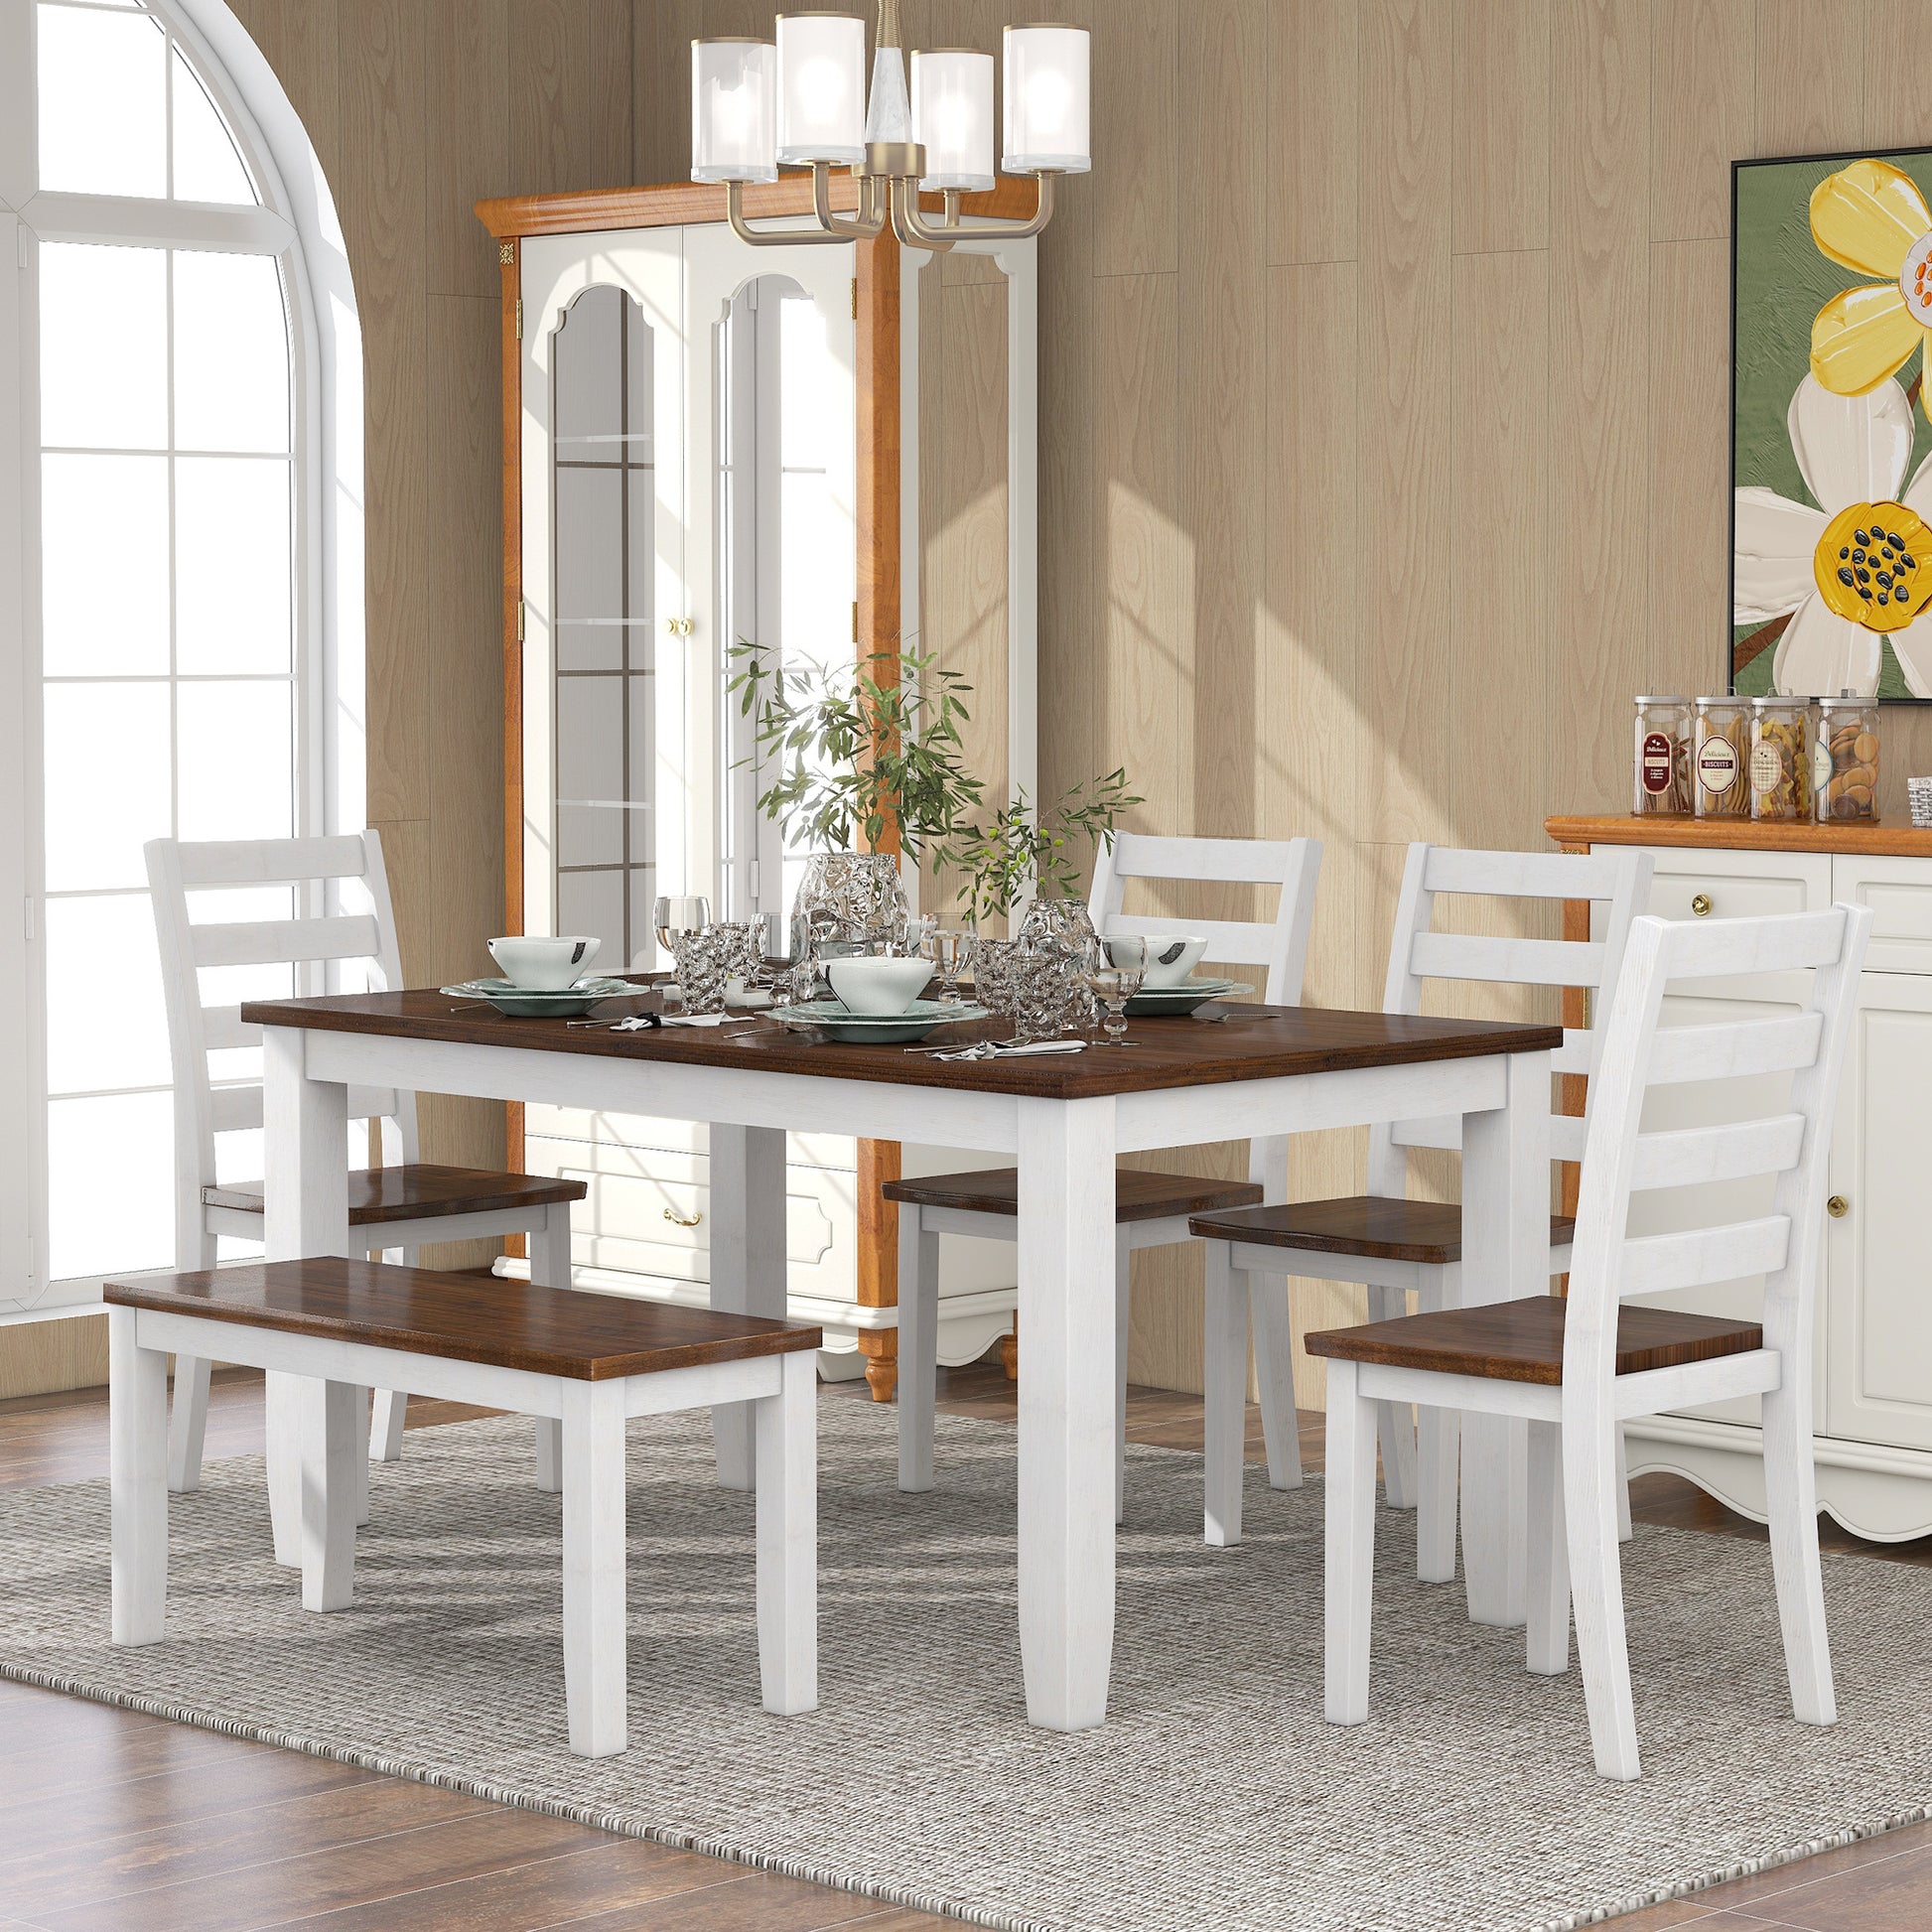 TREXM Rustic Style 6-Piece Dining Room Table Set with 4 Ergonomic Designed Chairs & a Bench Walnut + Cottage White